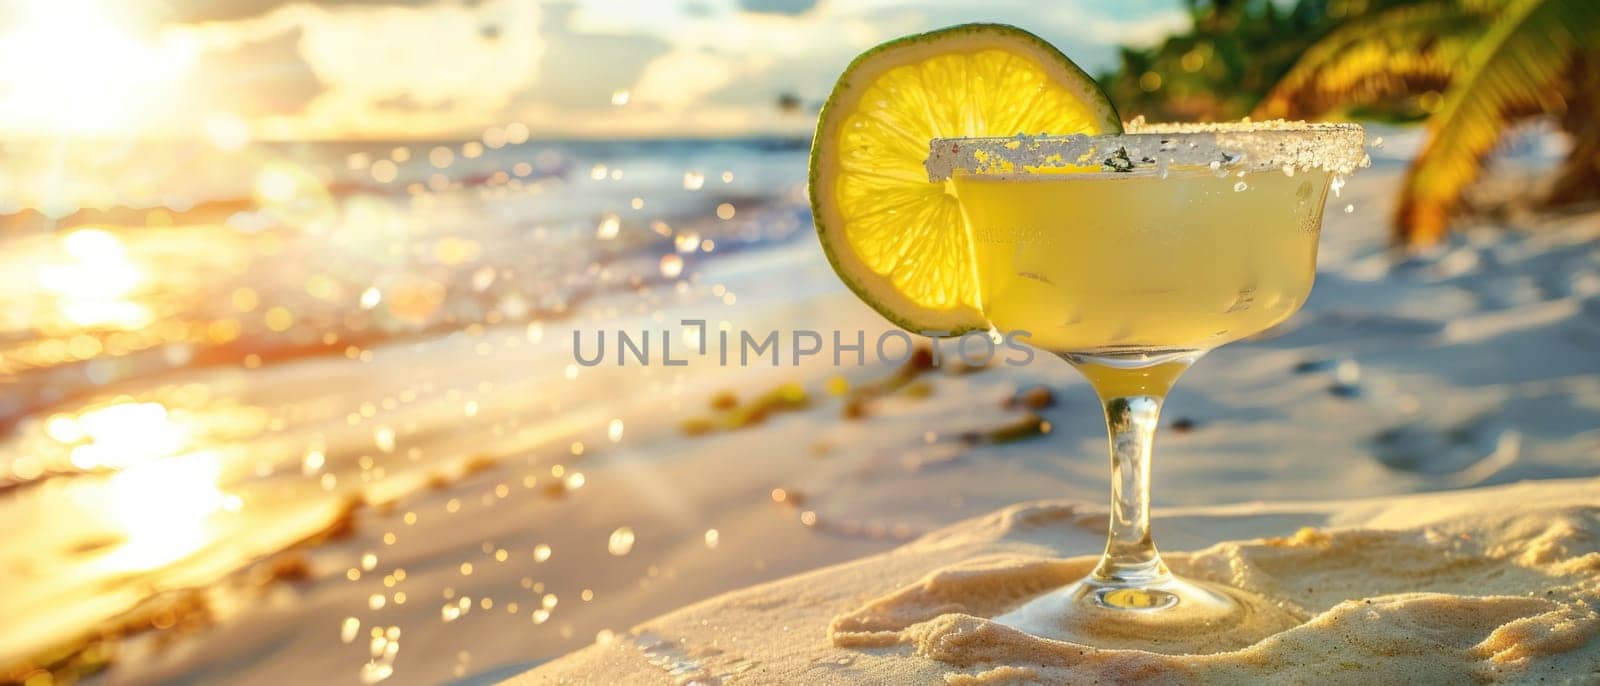 A glass of margarita with a lime wedge on top is on a beach.